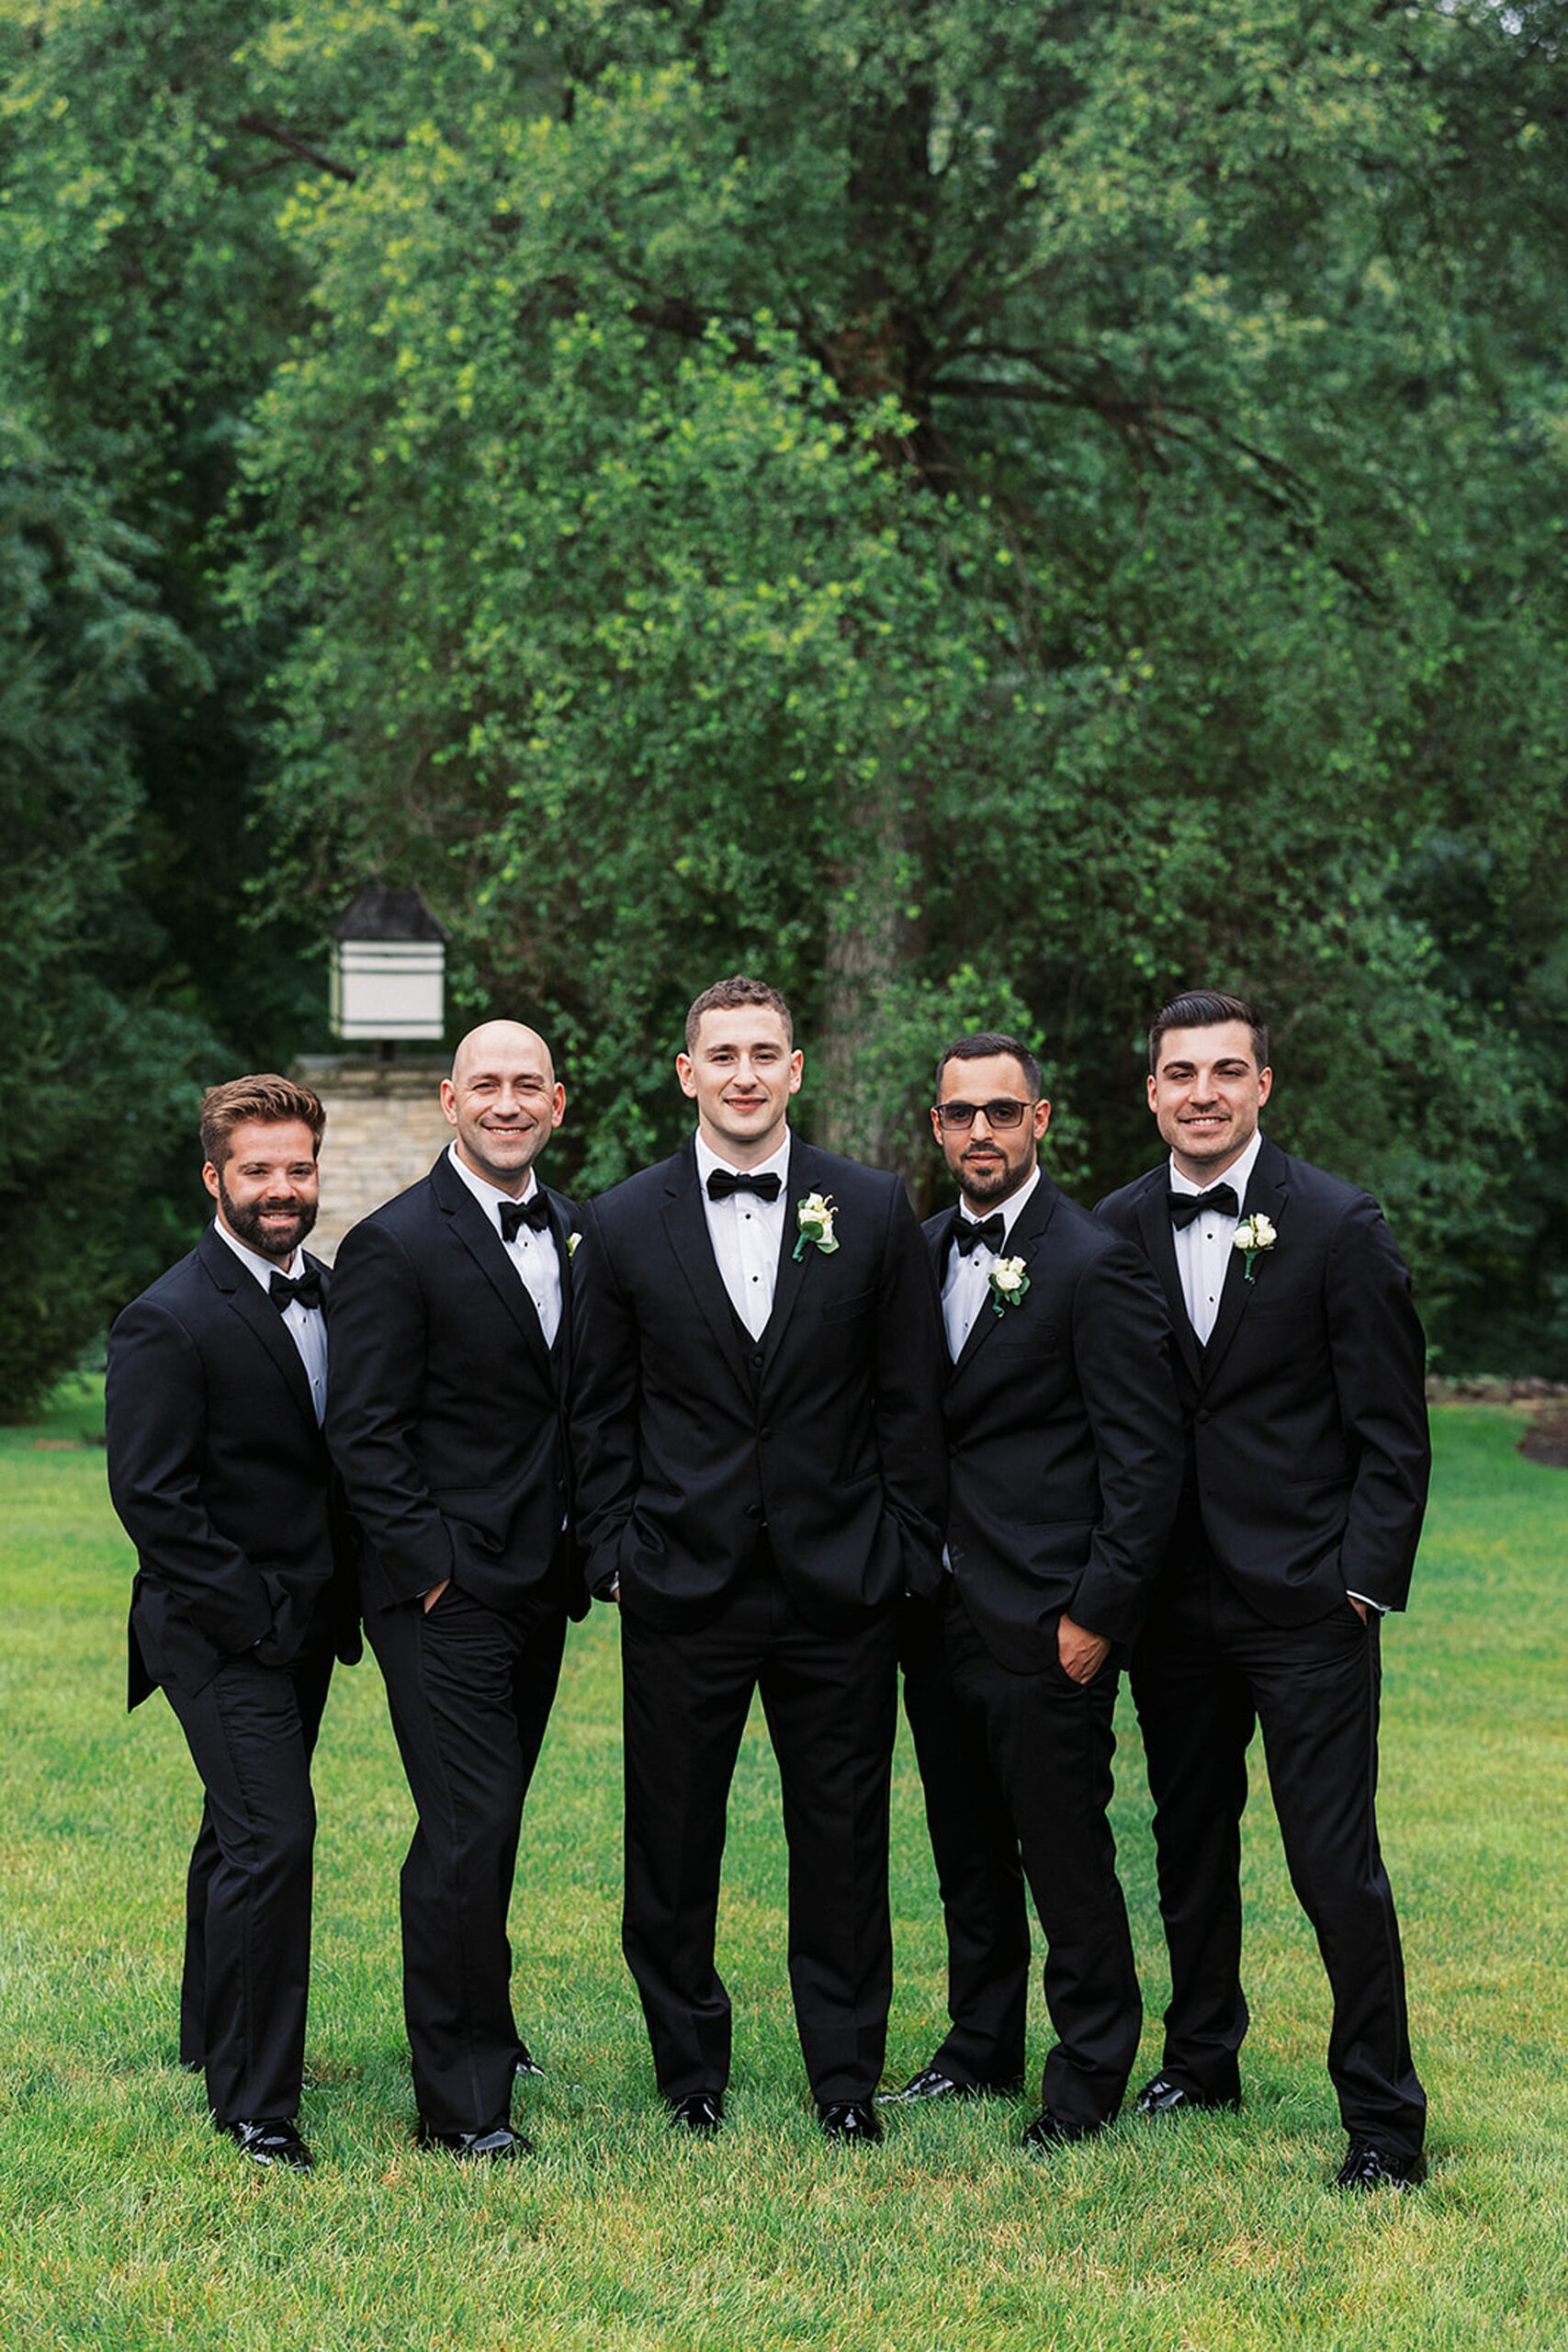 A groom stands in a garden yard with his four groomsmen in black suits